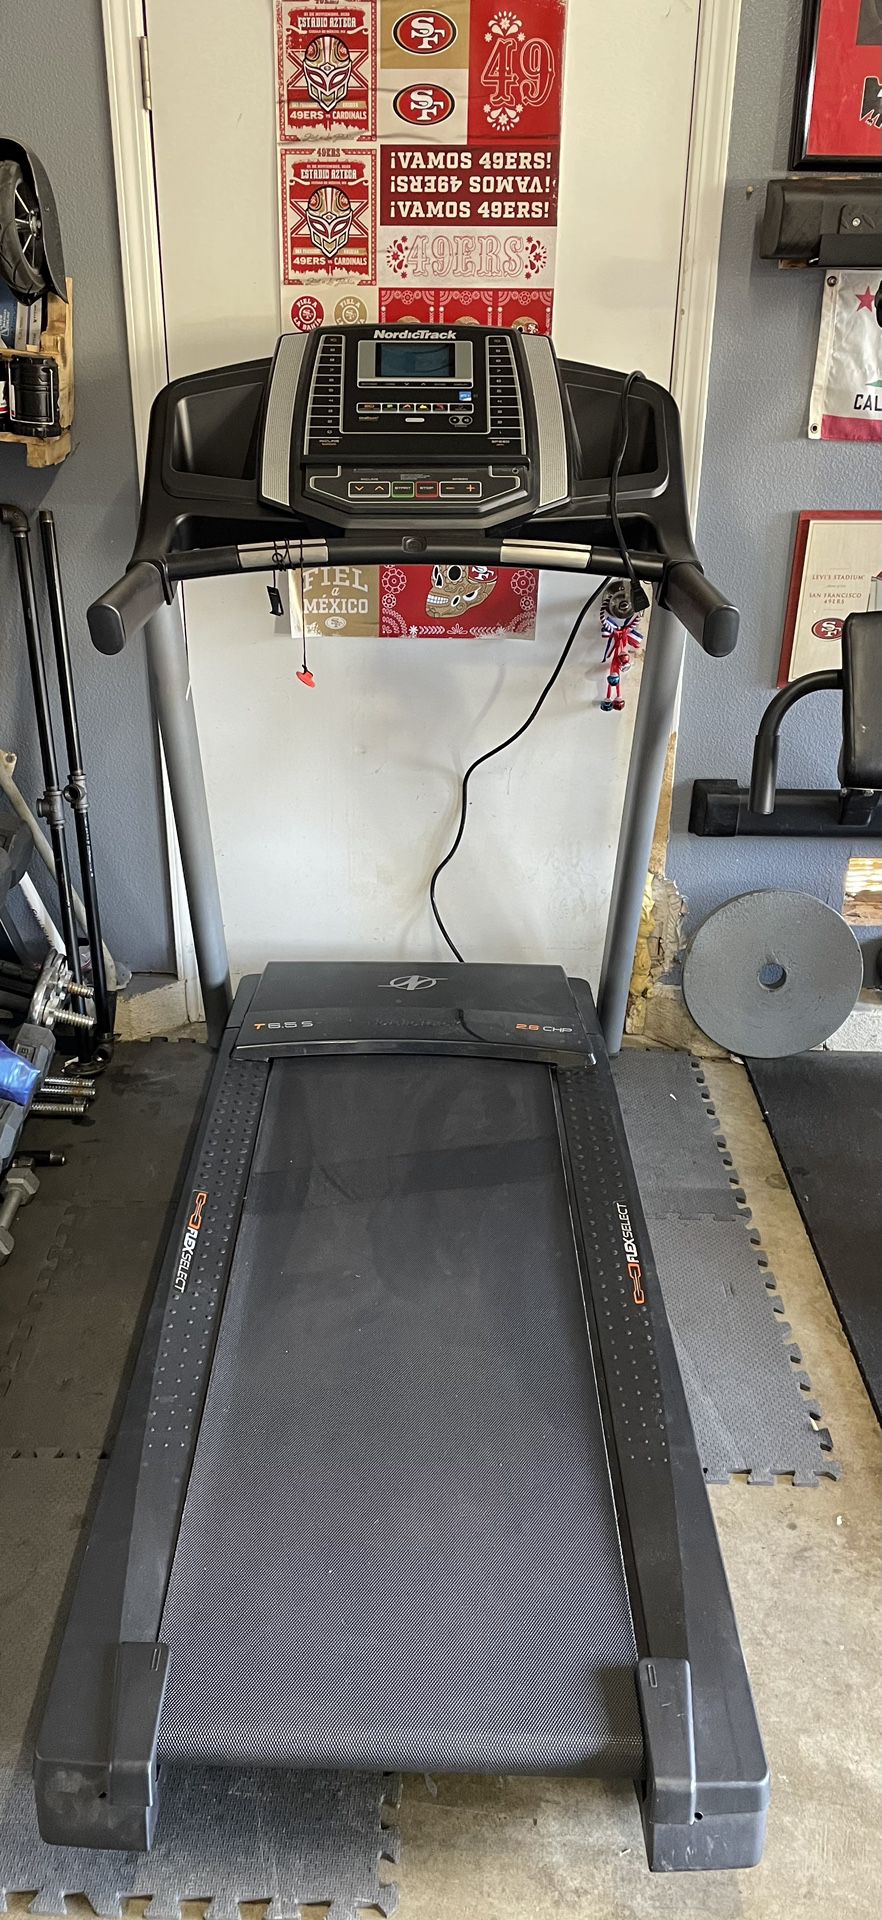 NordicTrack Treadmill T 6.5S With iFit **